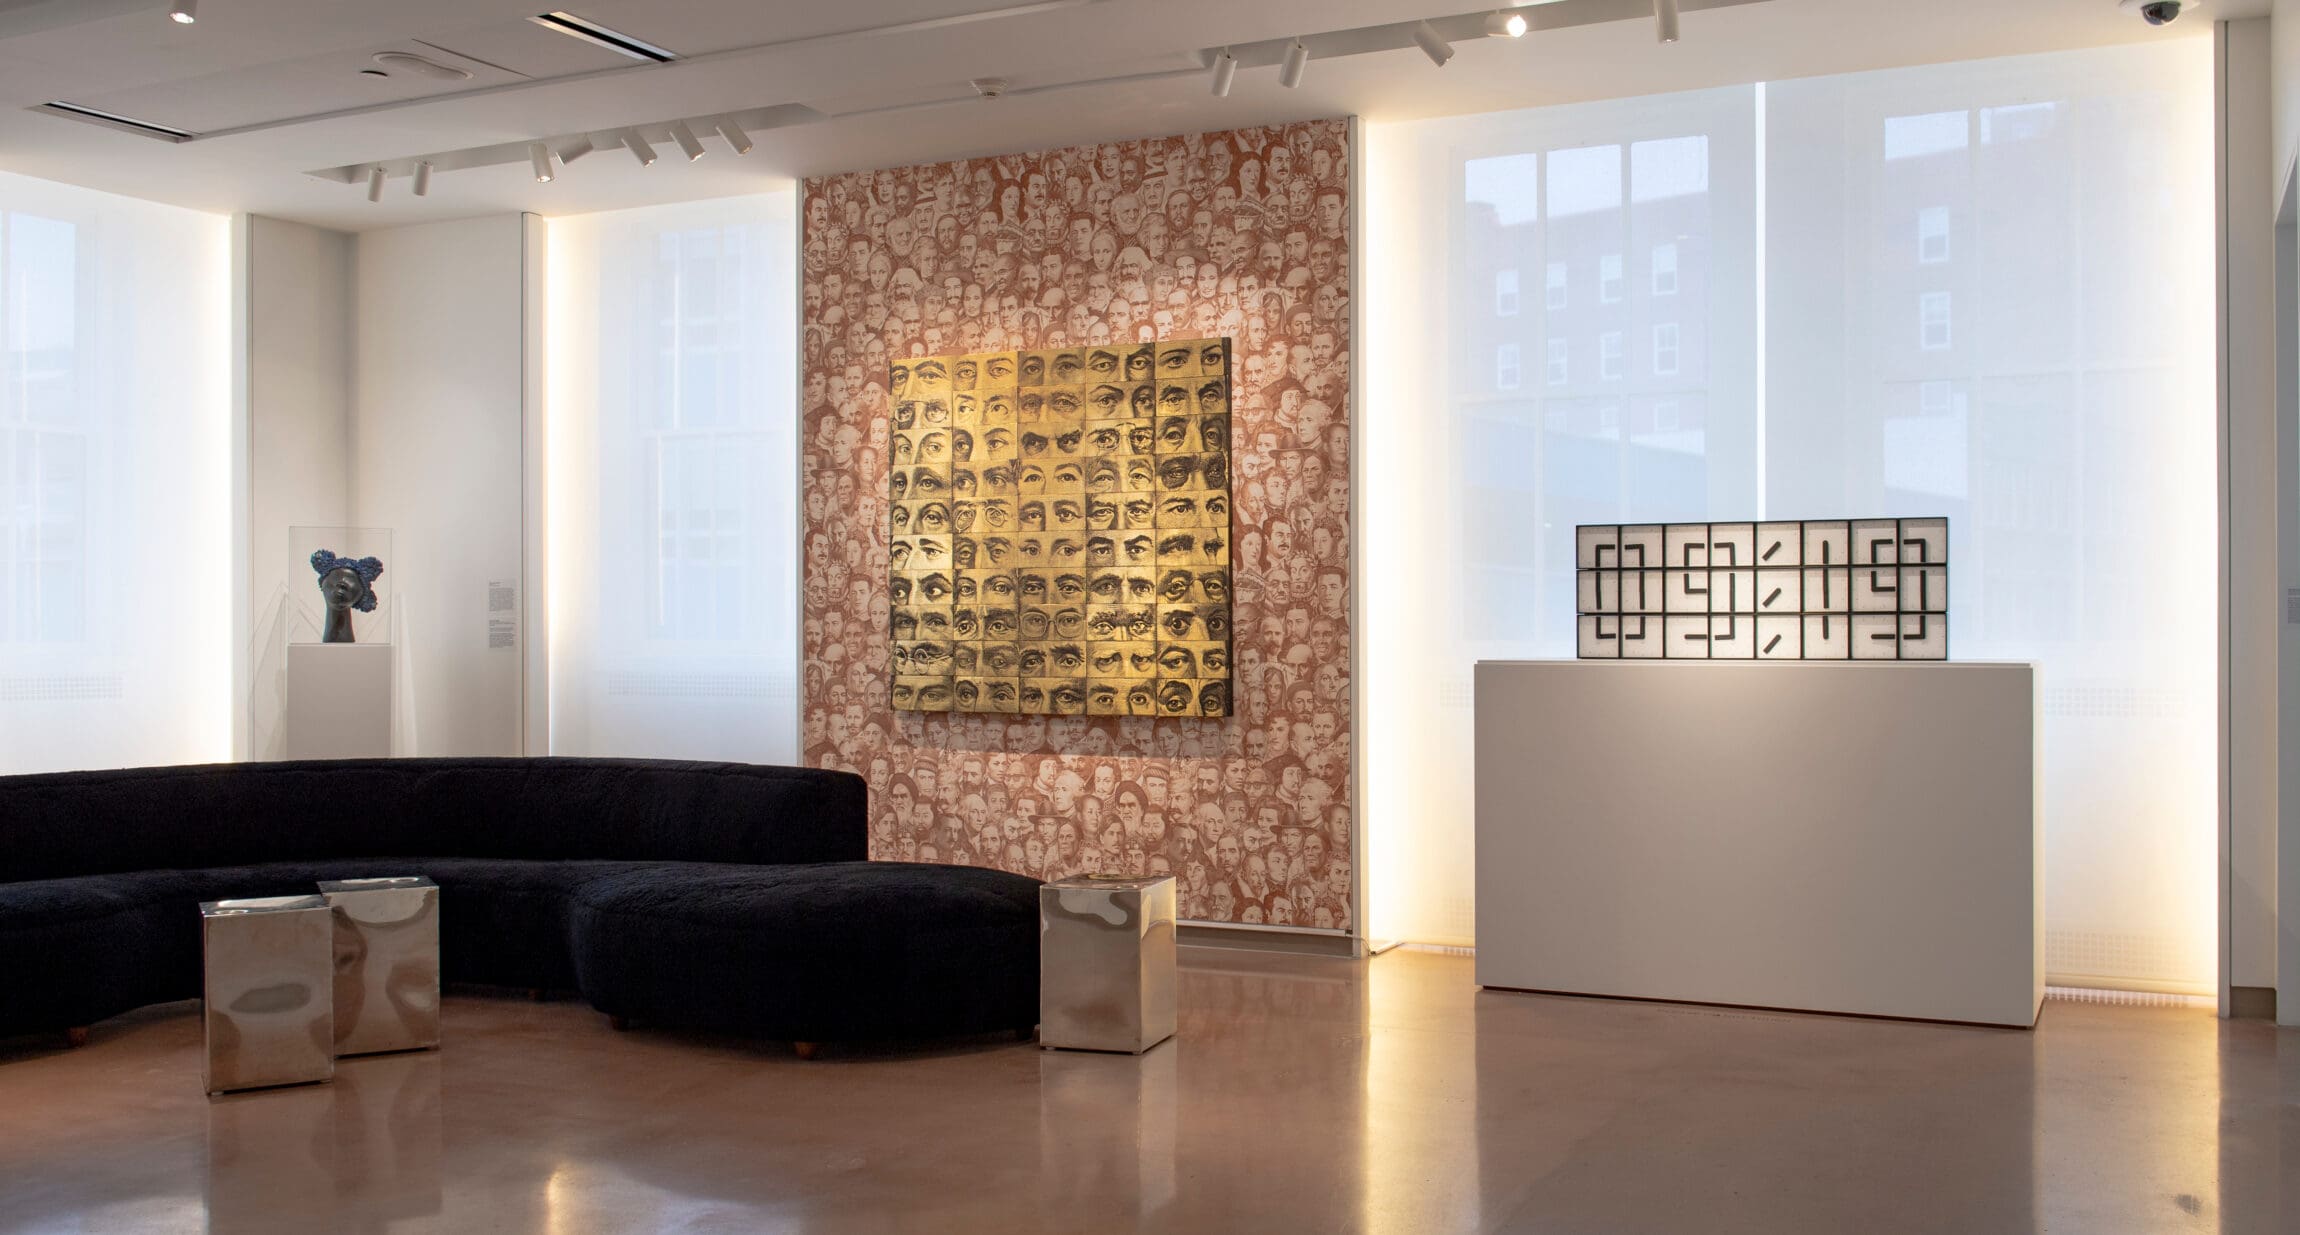 Hotels with exceptional art | contemporary artwork on display at 21c Museum Hotel Durham